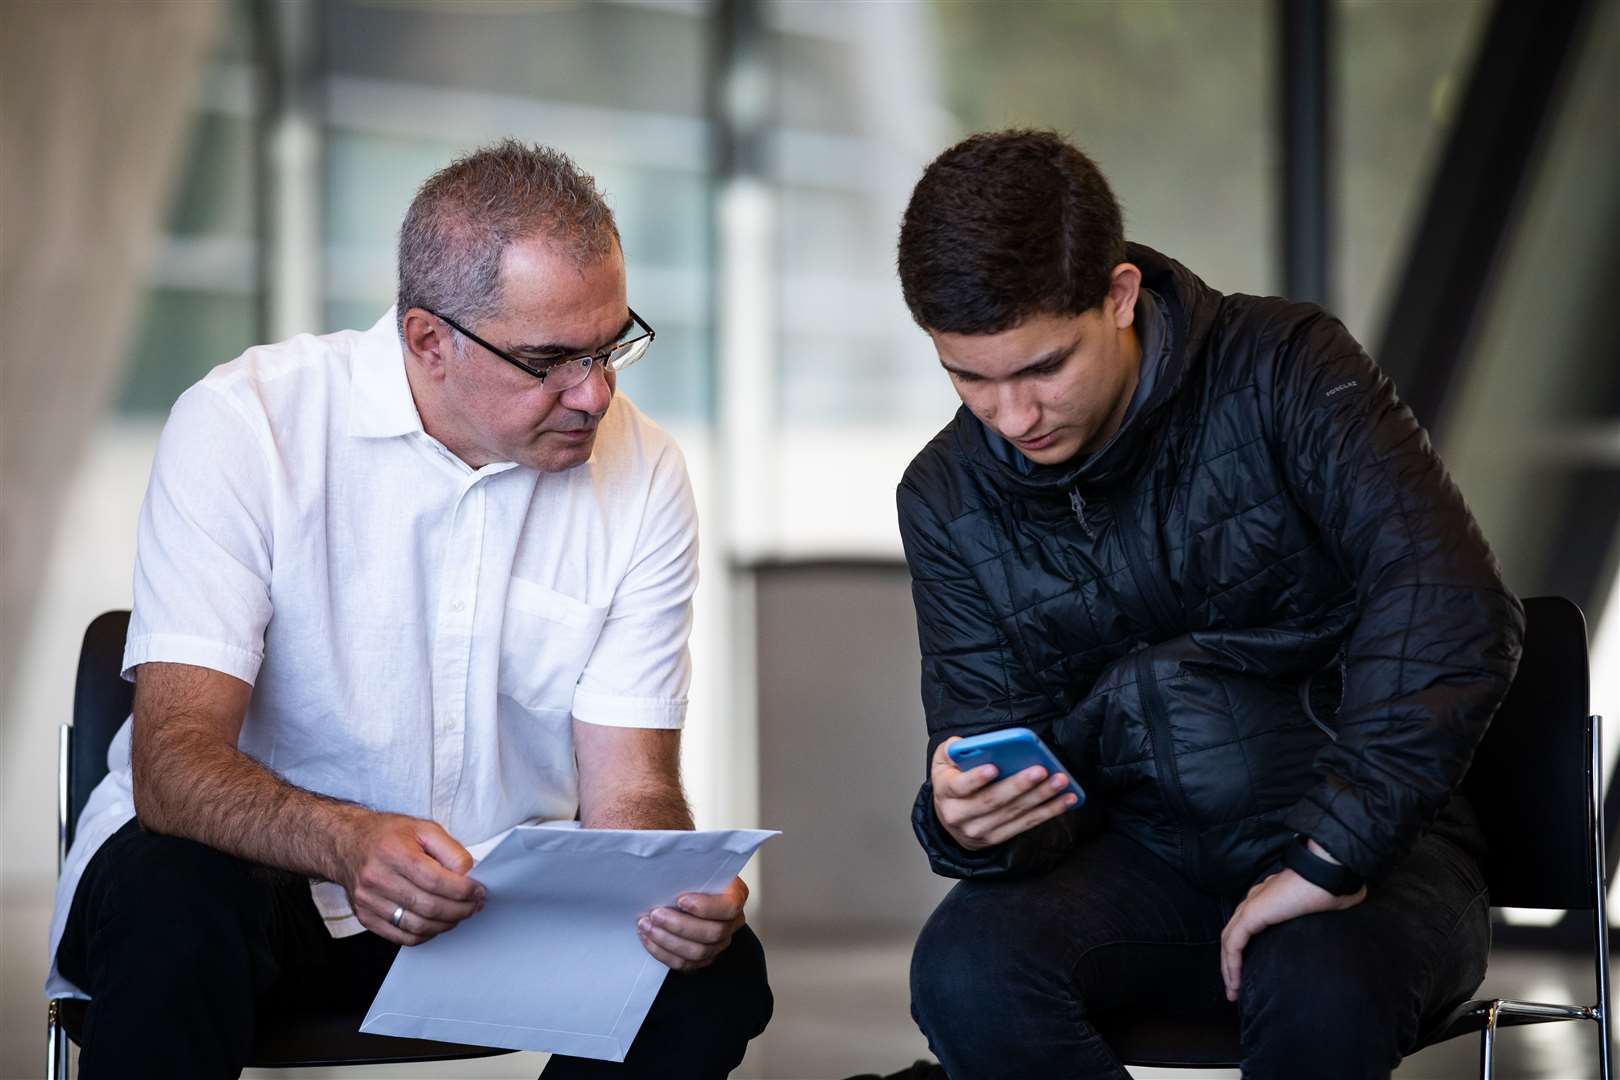 Diego Da Silva looks at his GCSE results with his father (Aaron Chown/PA)